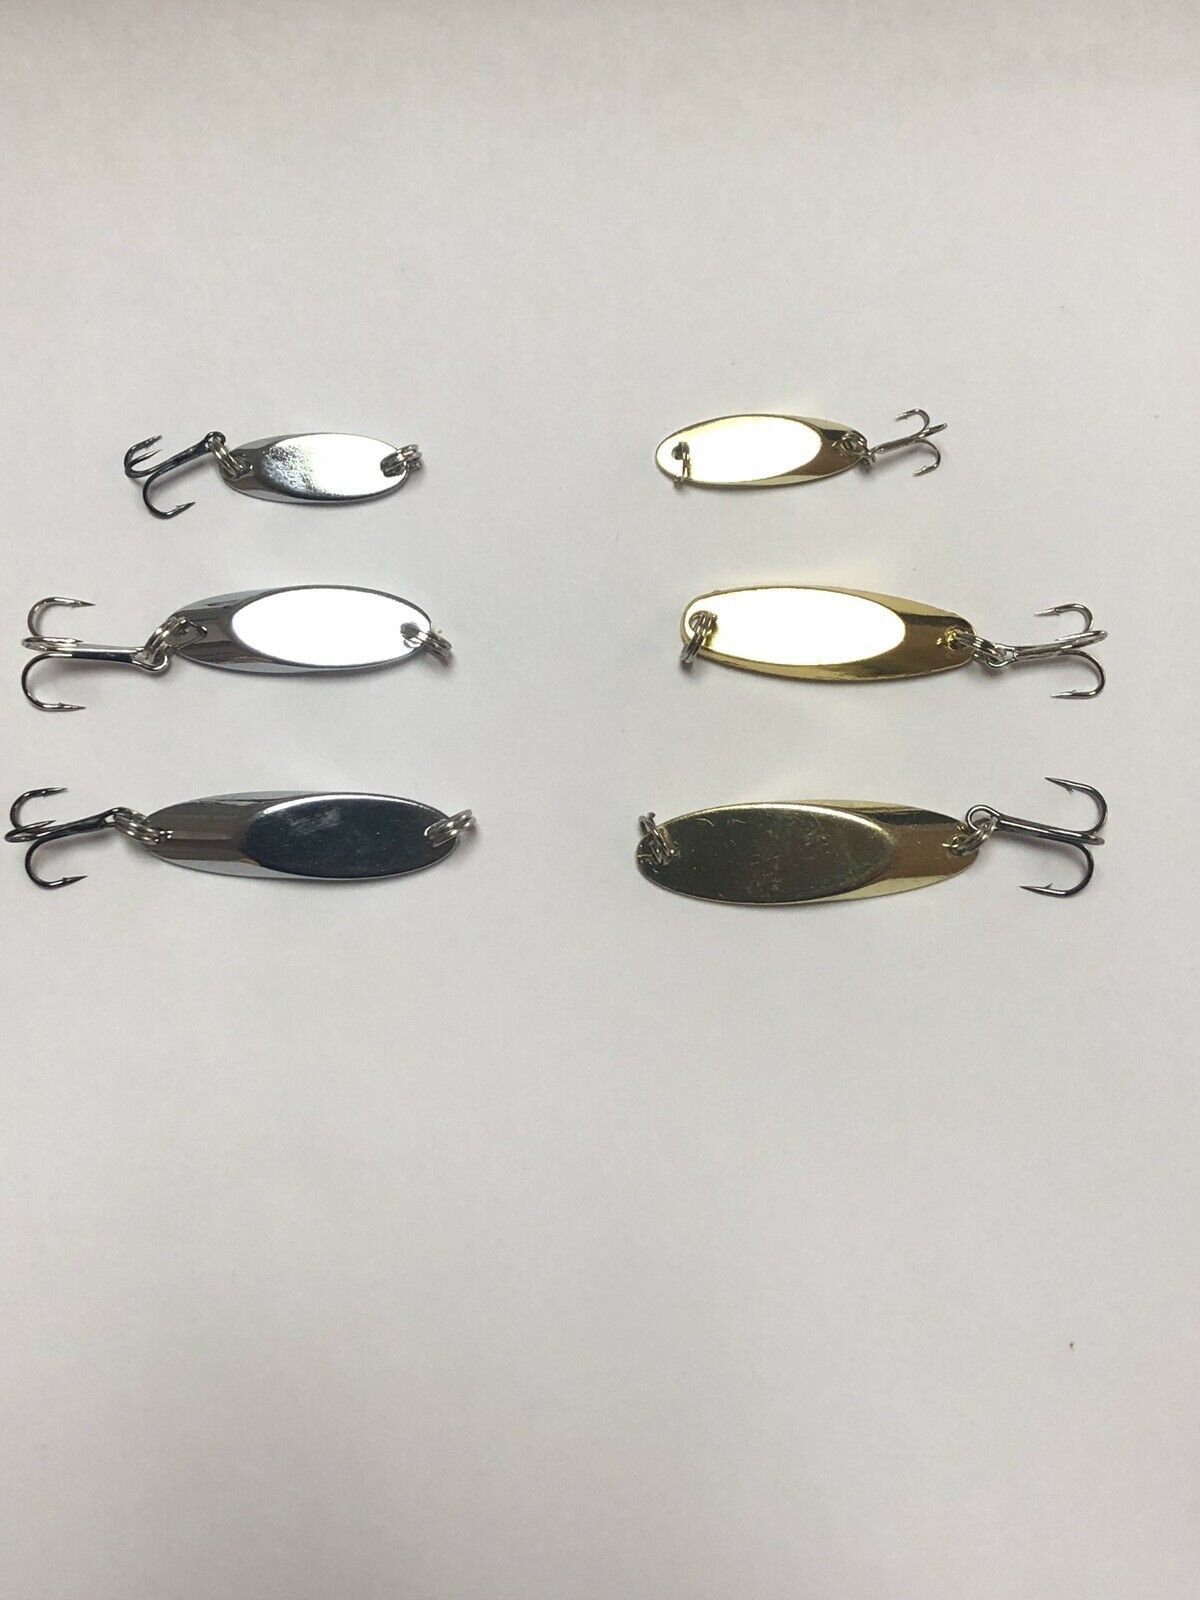 6 New, Kastmaster Style, 3 Silver And 3 Gold, 1/8, 1/4, & 3/8's oz –  Hightower Tackle Company